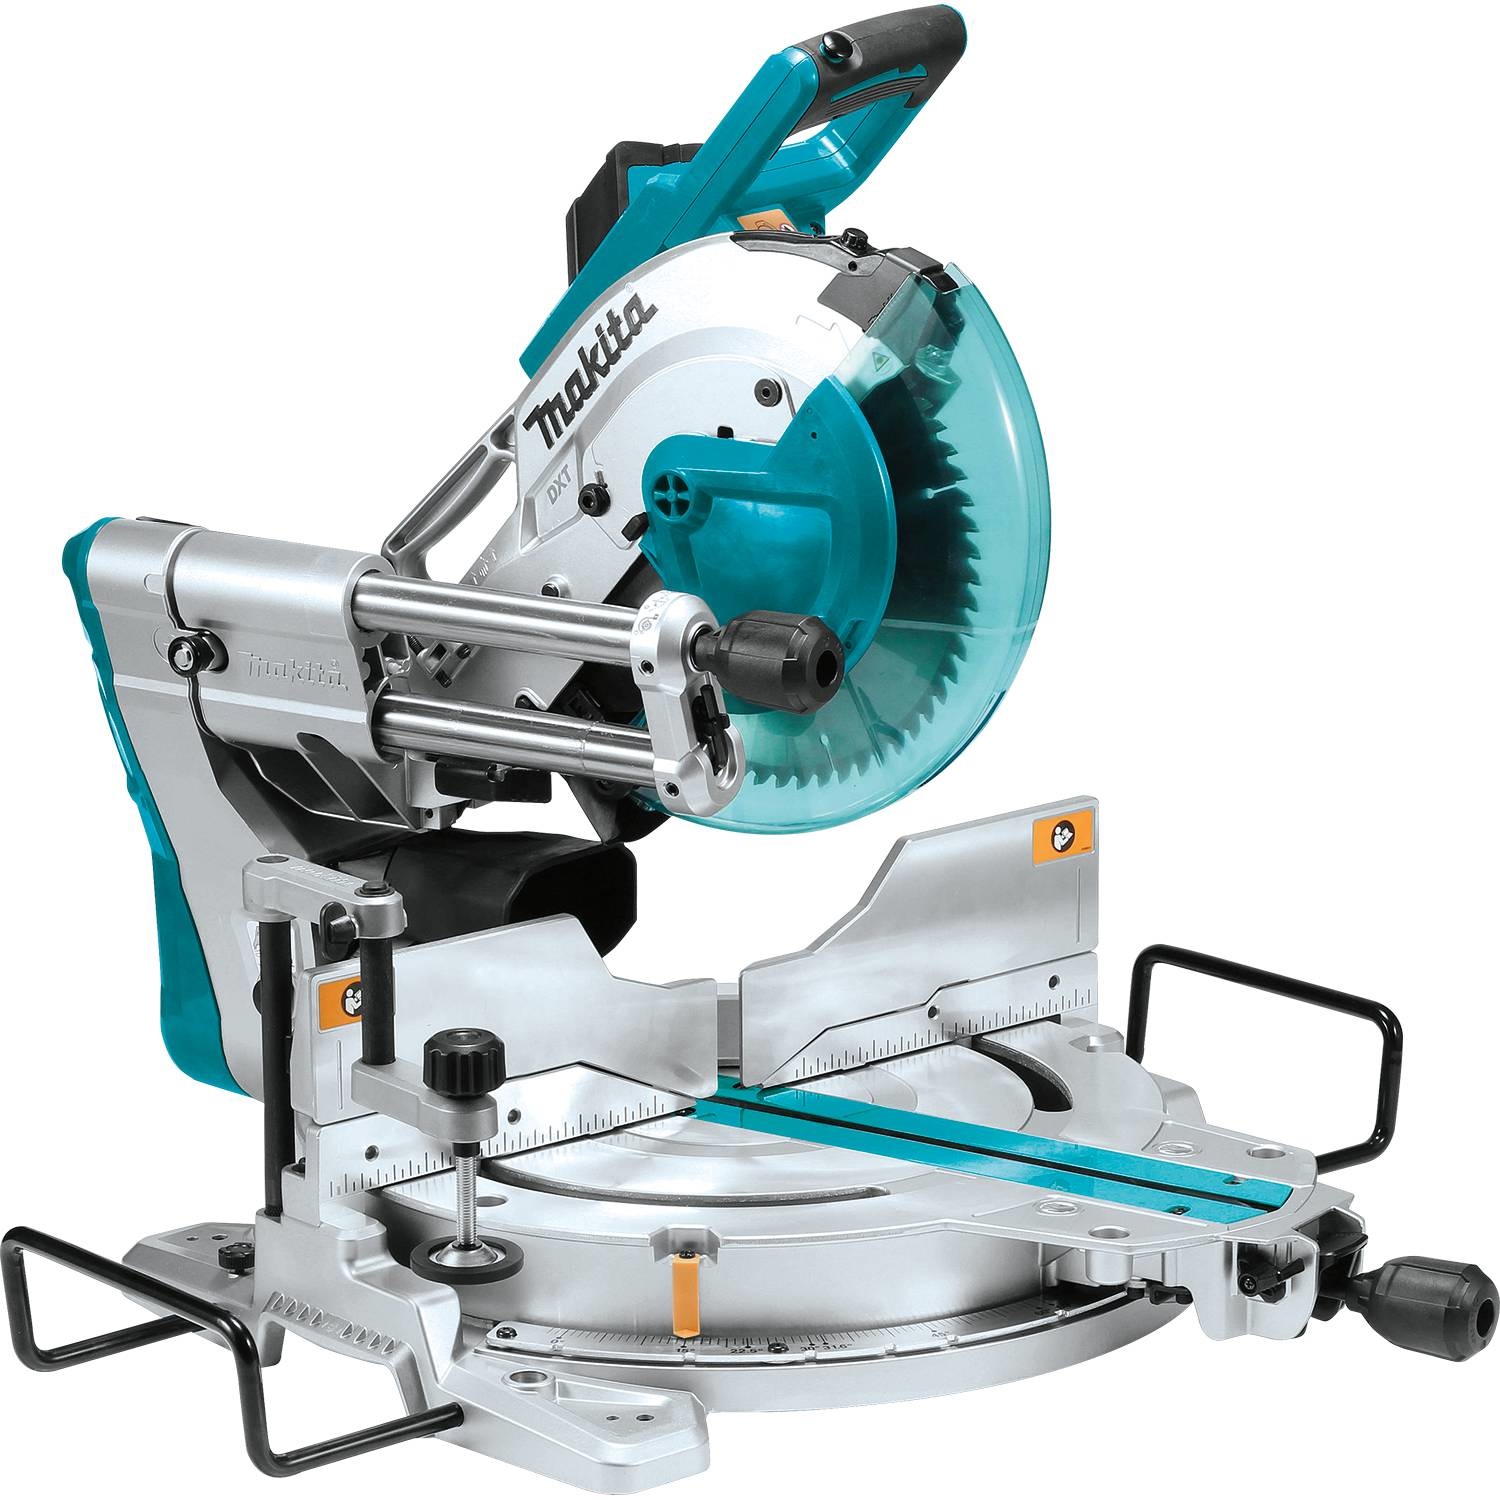 10" Dual-Bevel Sliding Compound Miter Saw with Laser